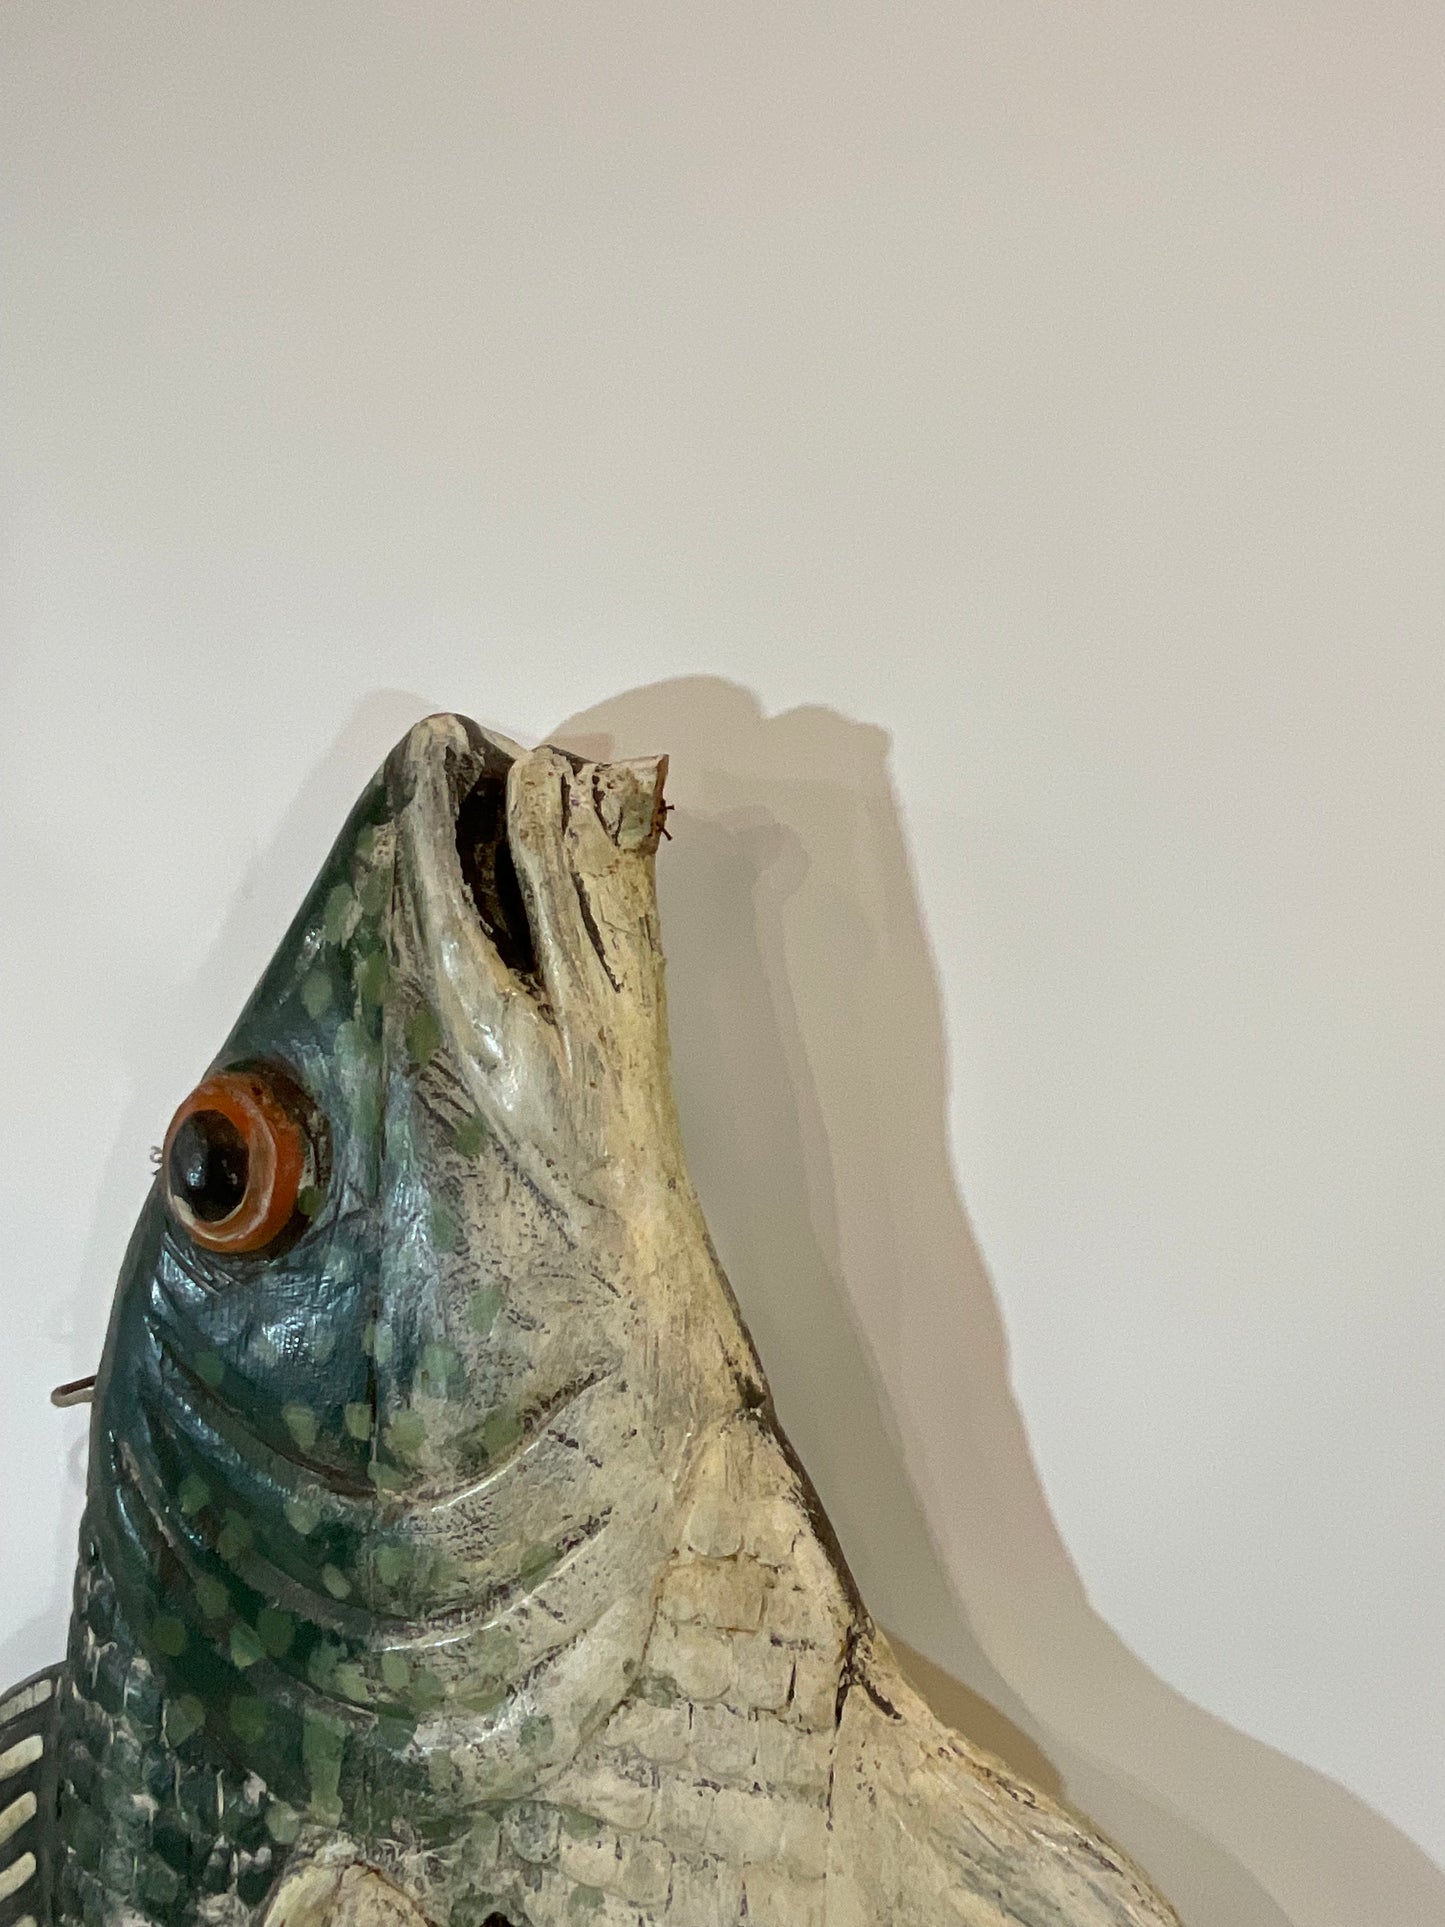 Six Foot Carved Fish from England - Lannan Gallery